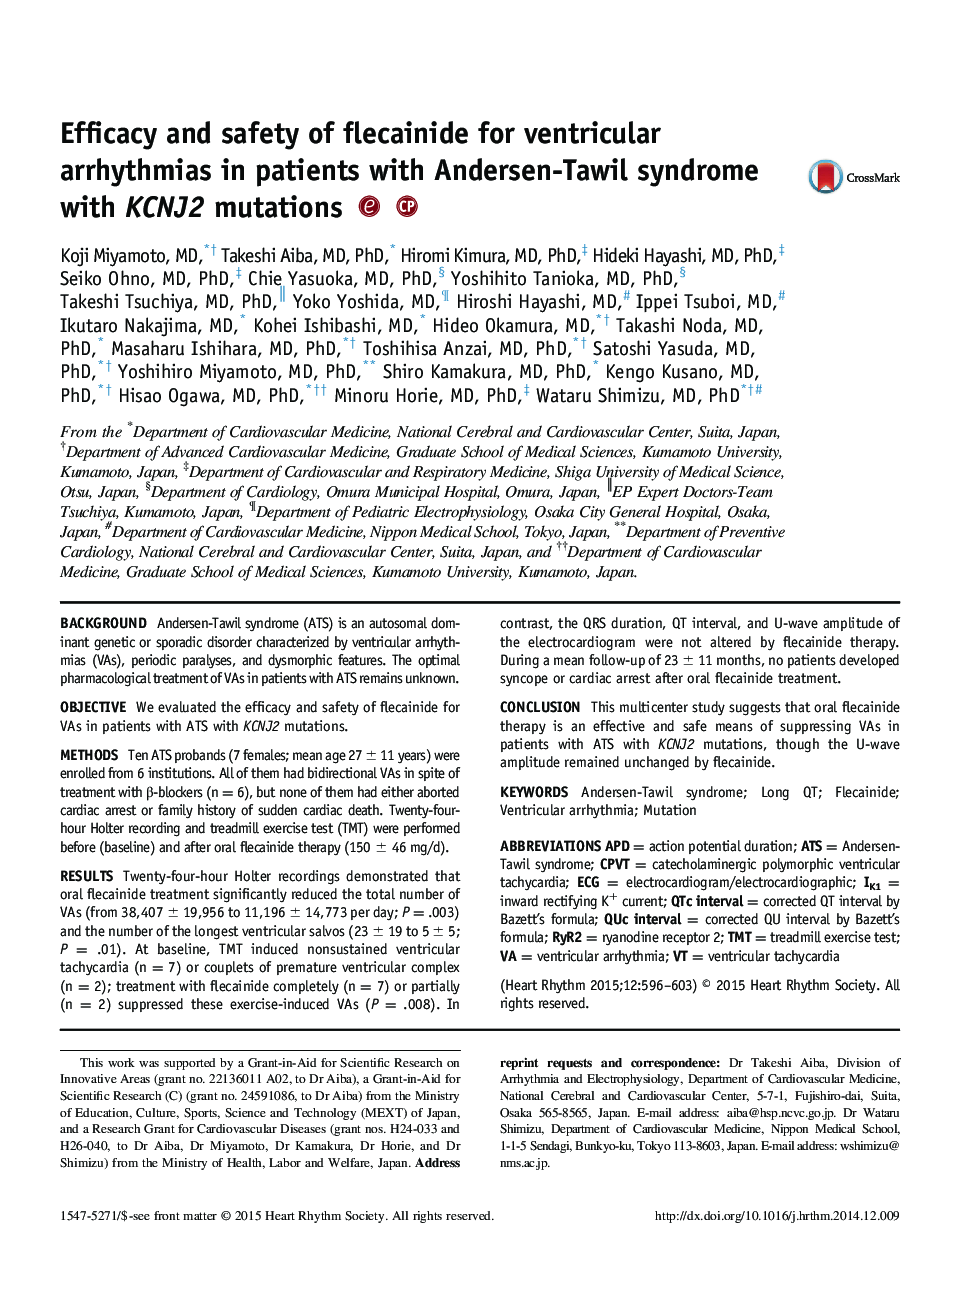 Efficacy and safety of flecainide for ventricular arrhythmias in patients with Andersen-Tawil syndrome with KCNJ2 mutations 